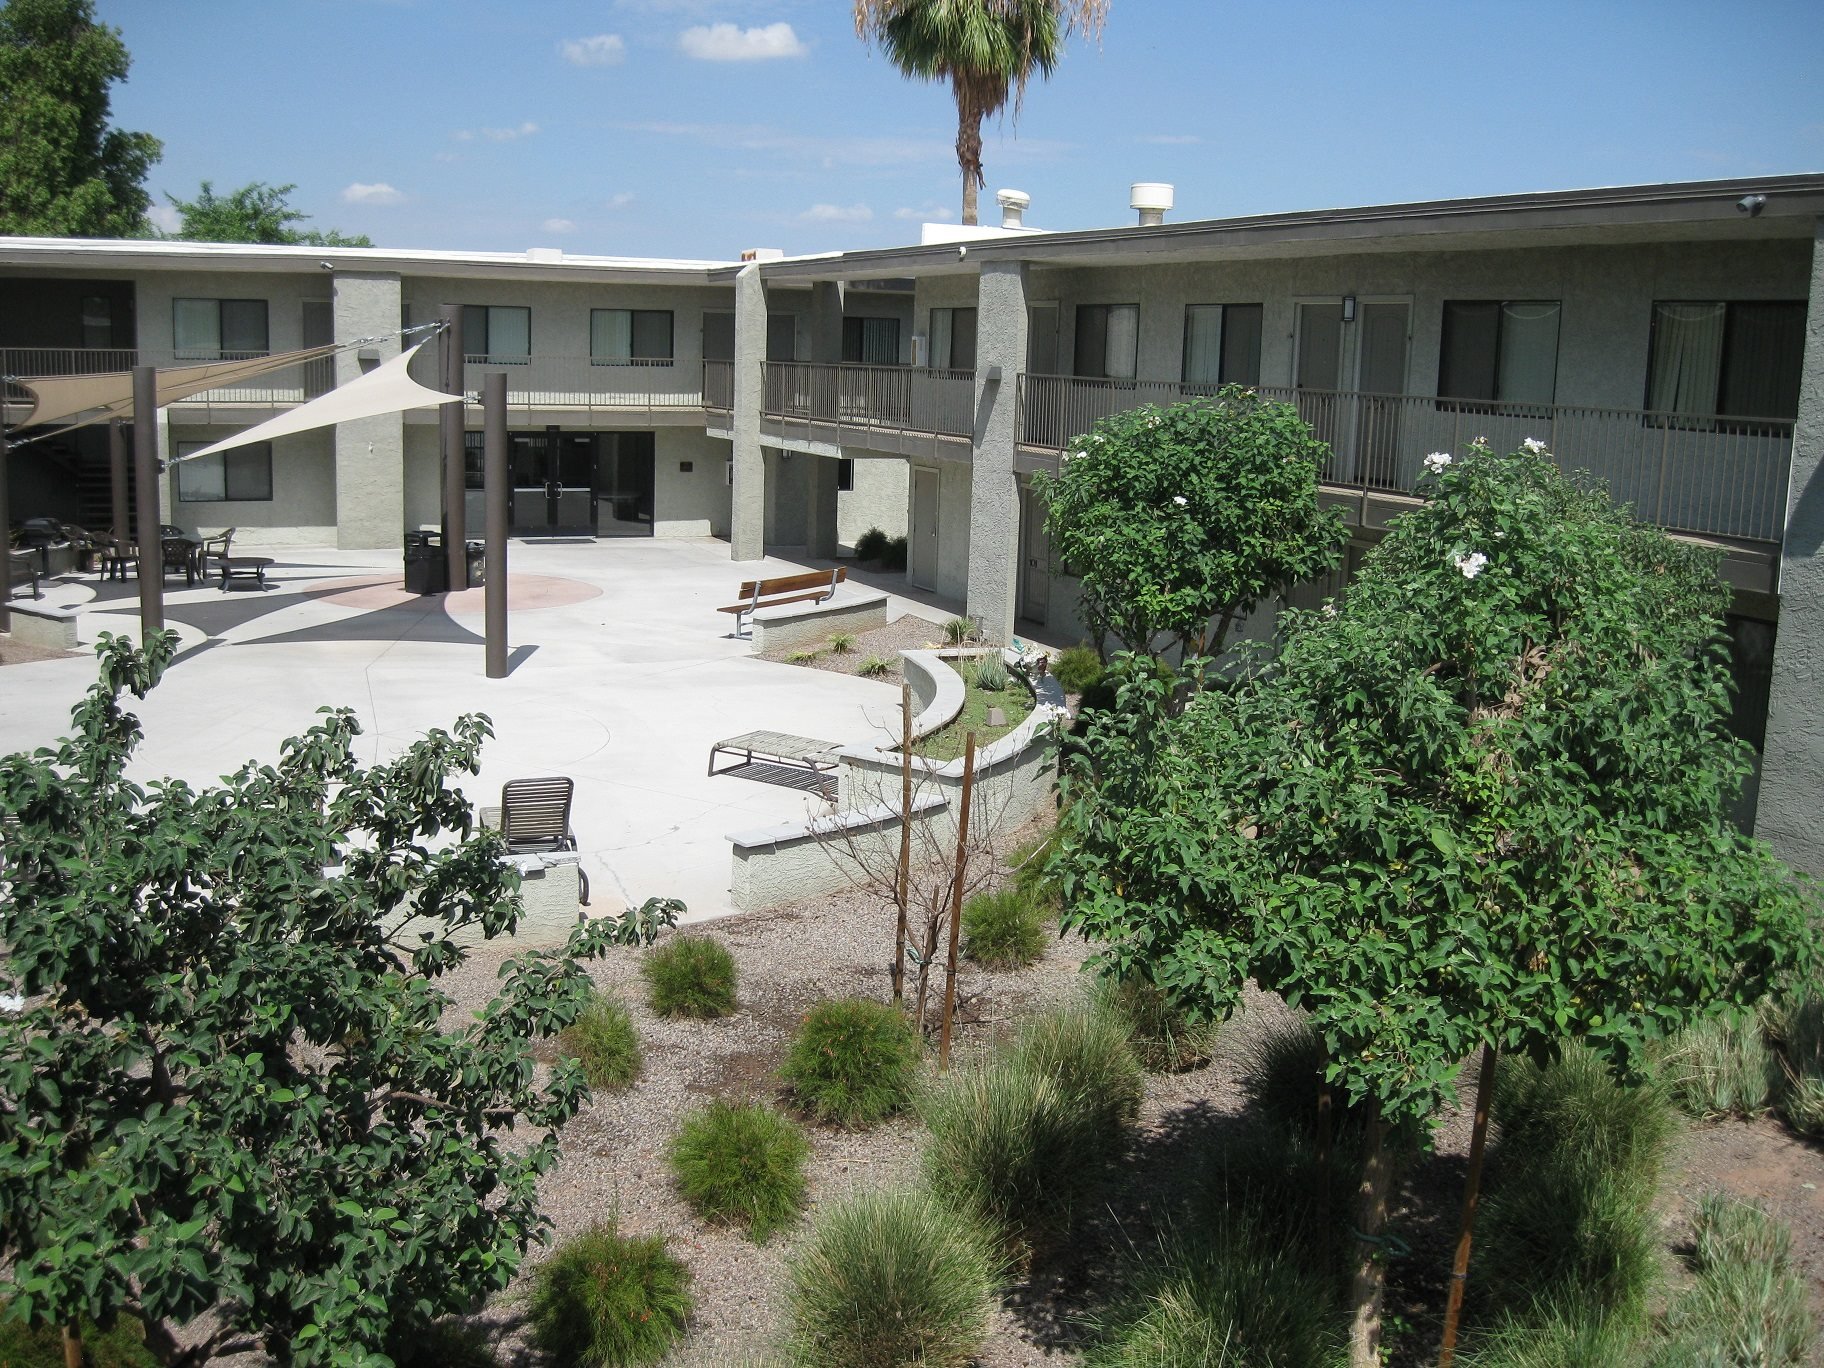 Photos and Video of Collins Court in Phoenix AZ